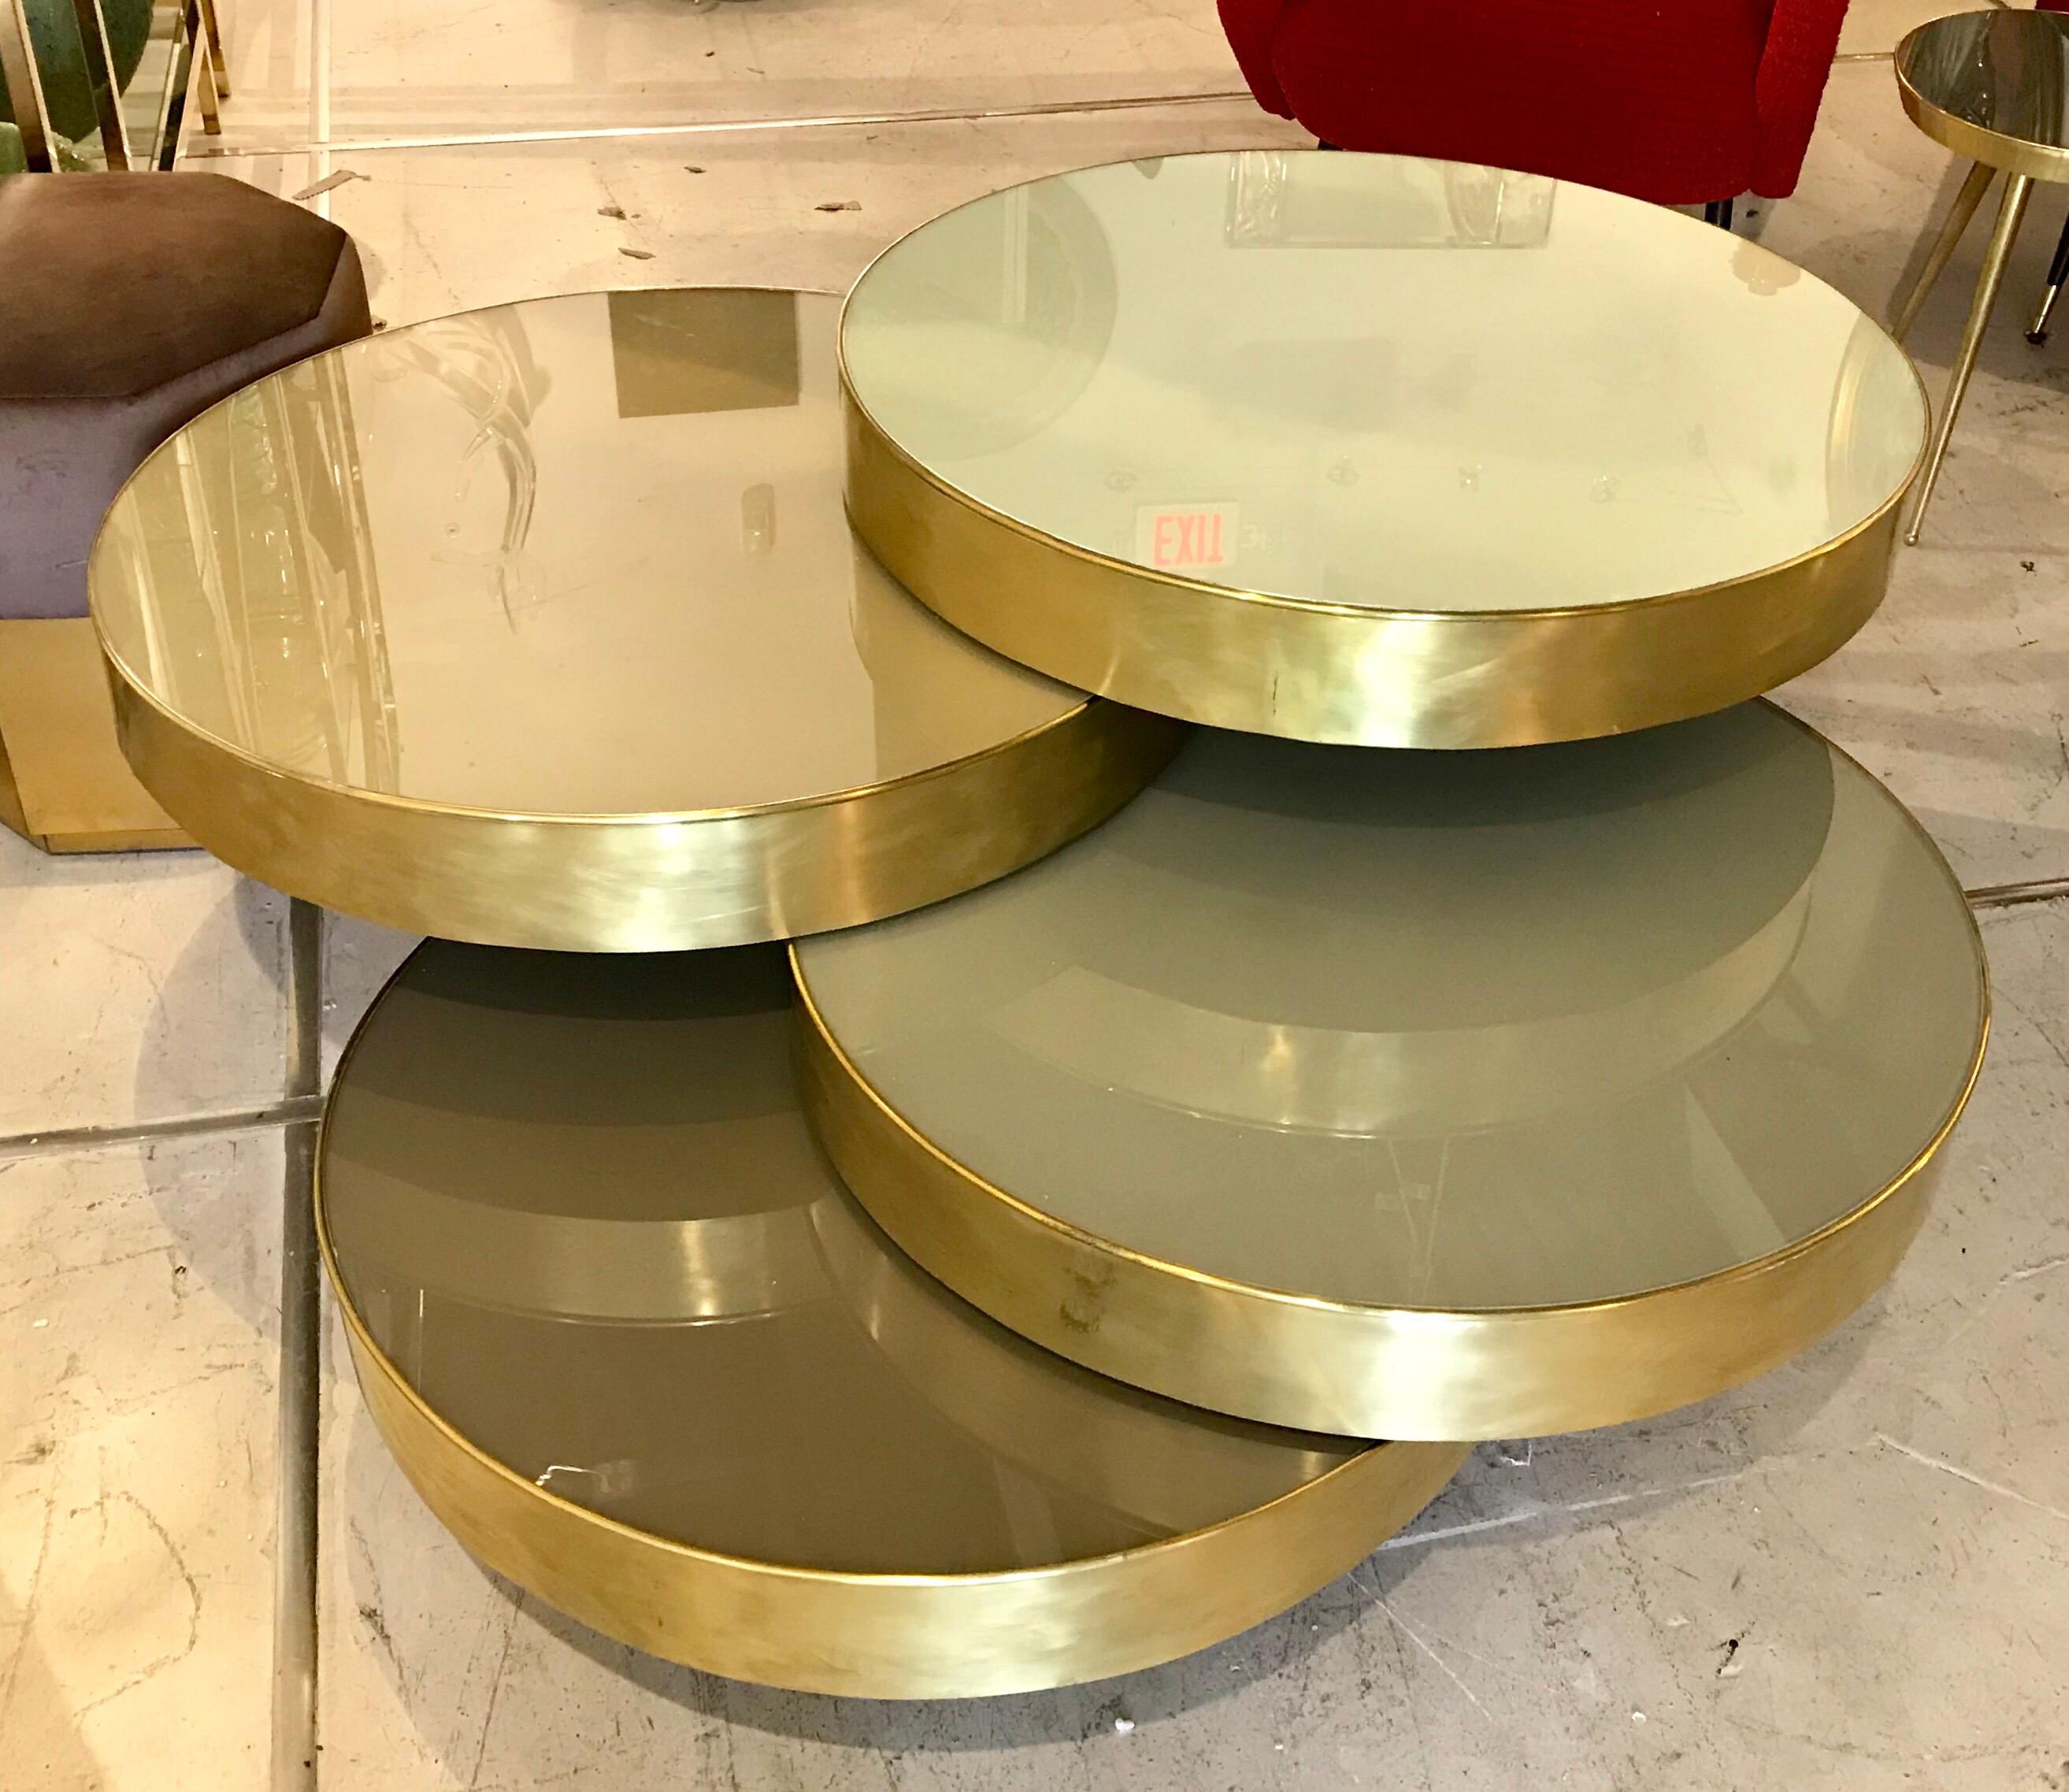 Four layers of brass and glass roll open to form table tops at different heights and color tones.